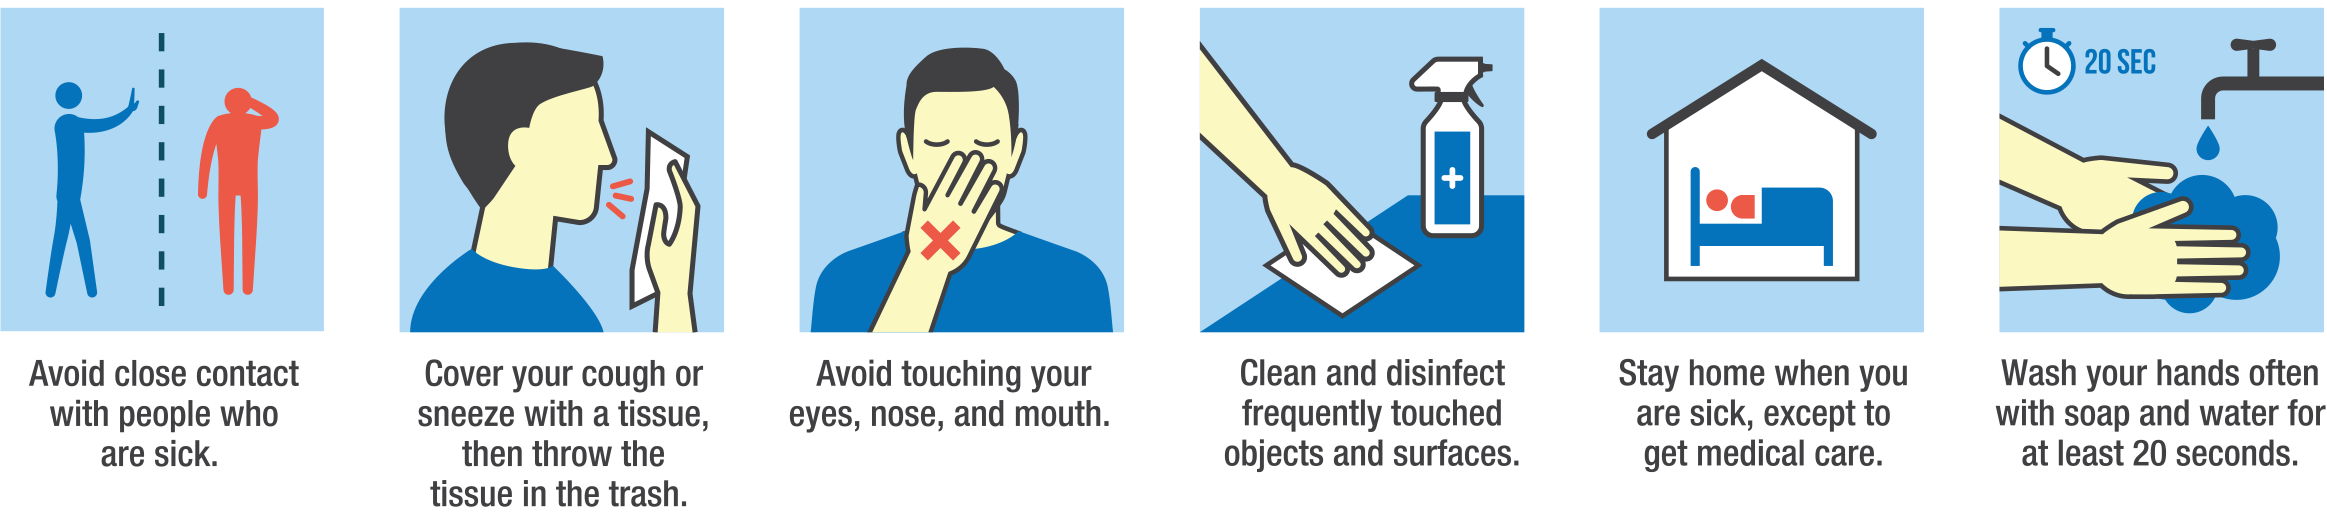 COVID 19 Prevention graphic showing good hygiene